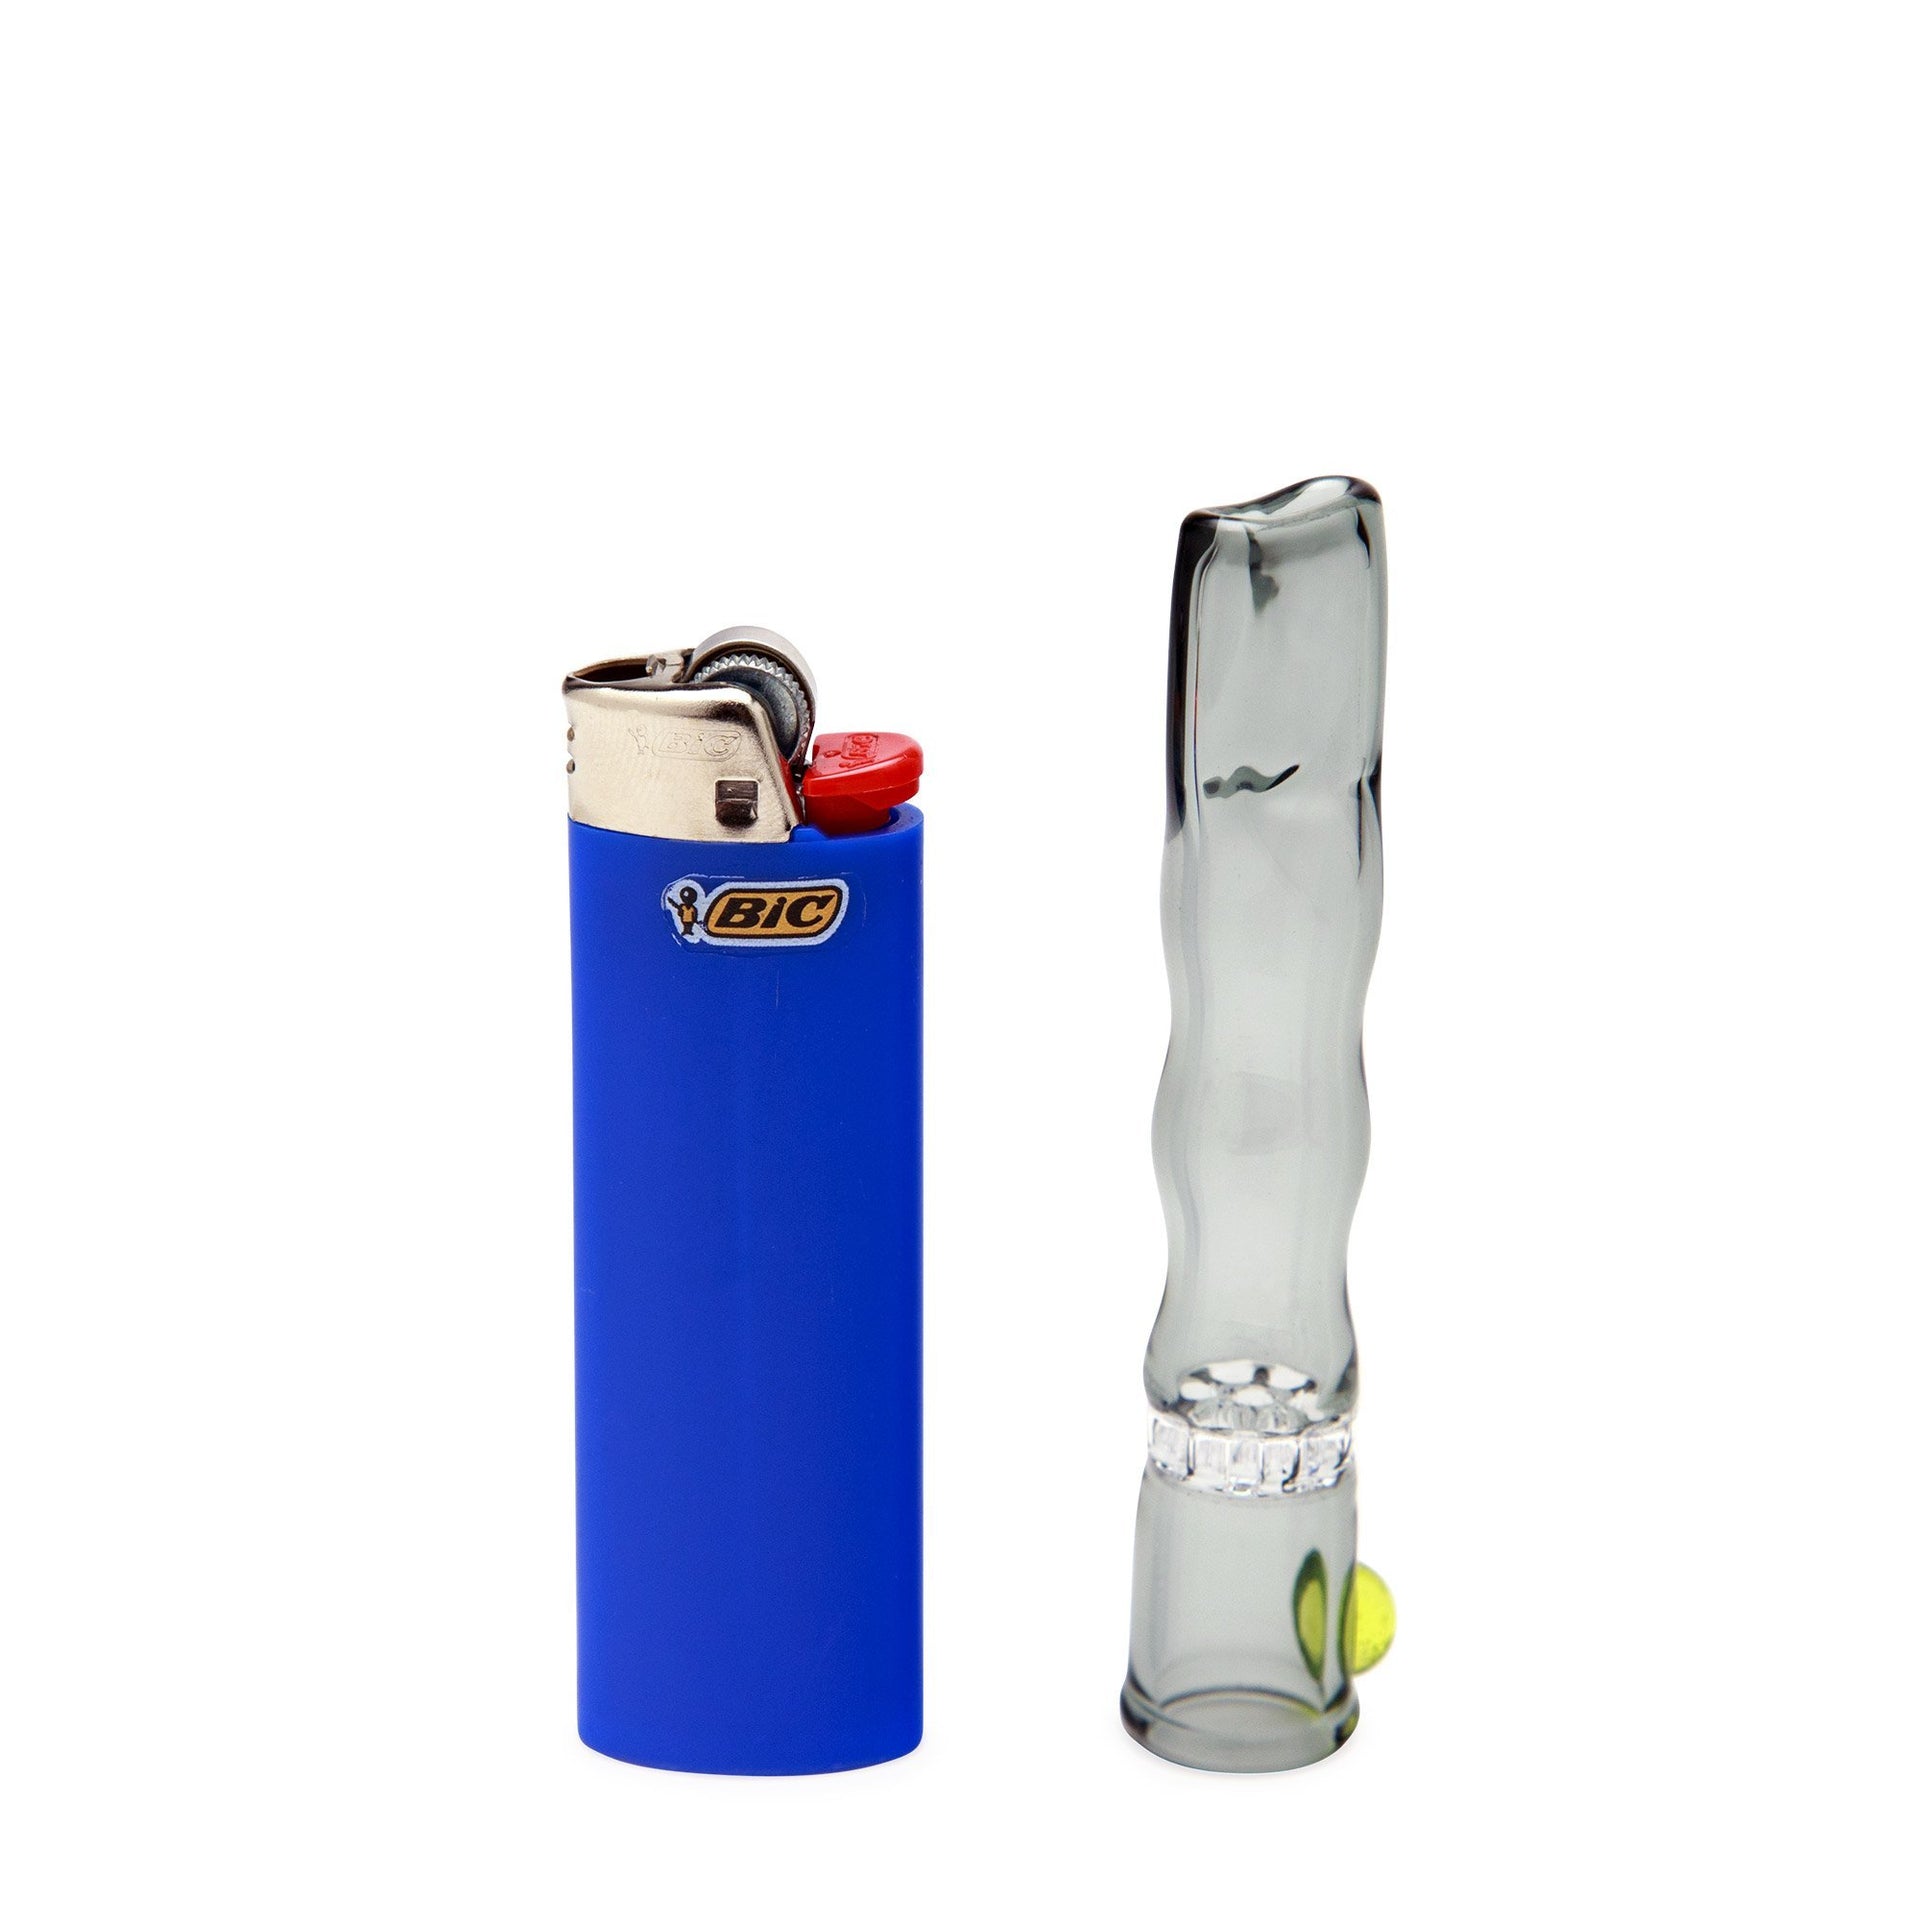 Blazing Blue Glass Honeycomb Screen Bat - 420 Science - The most trusted online smoke shop.